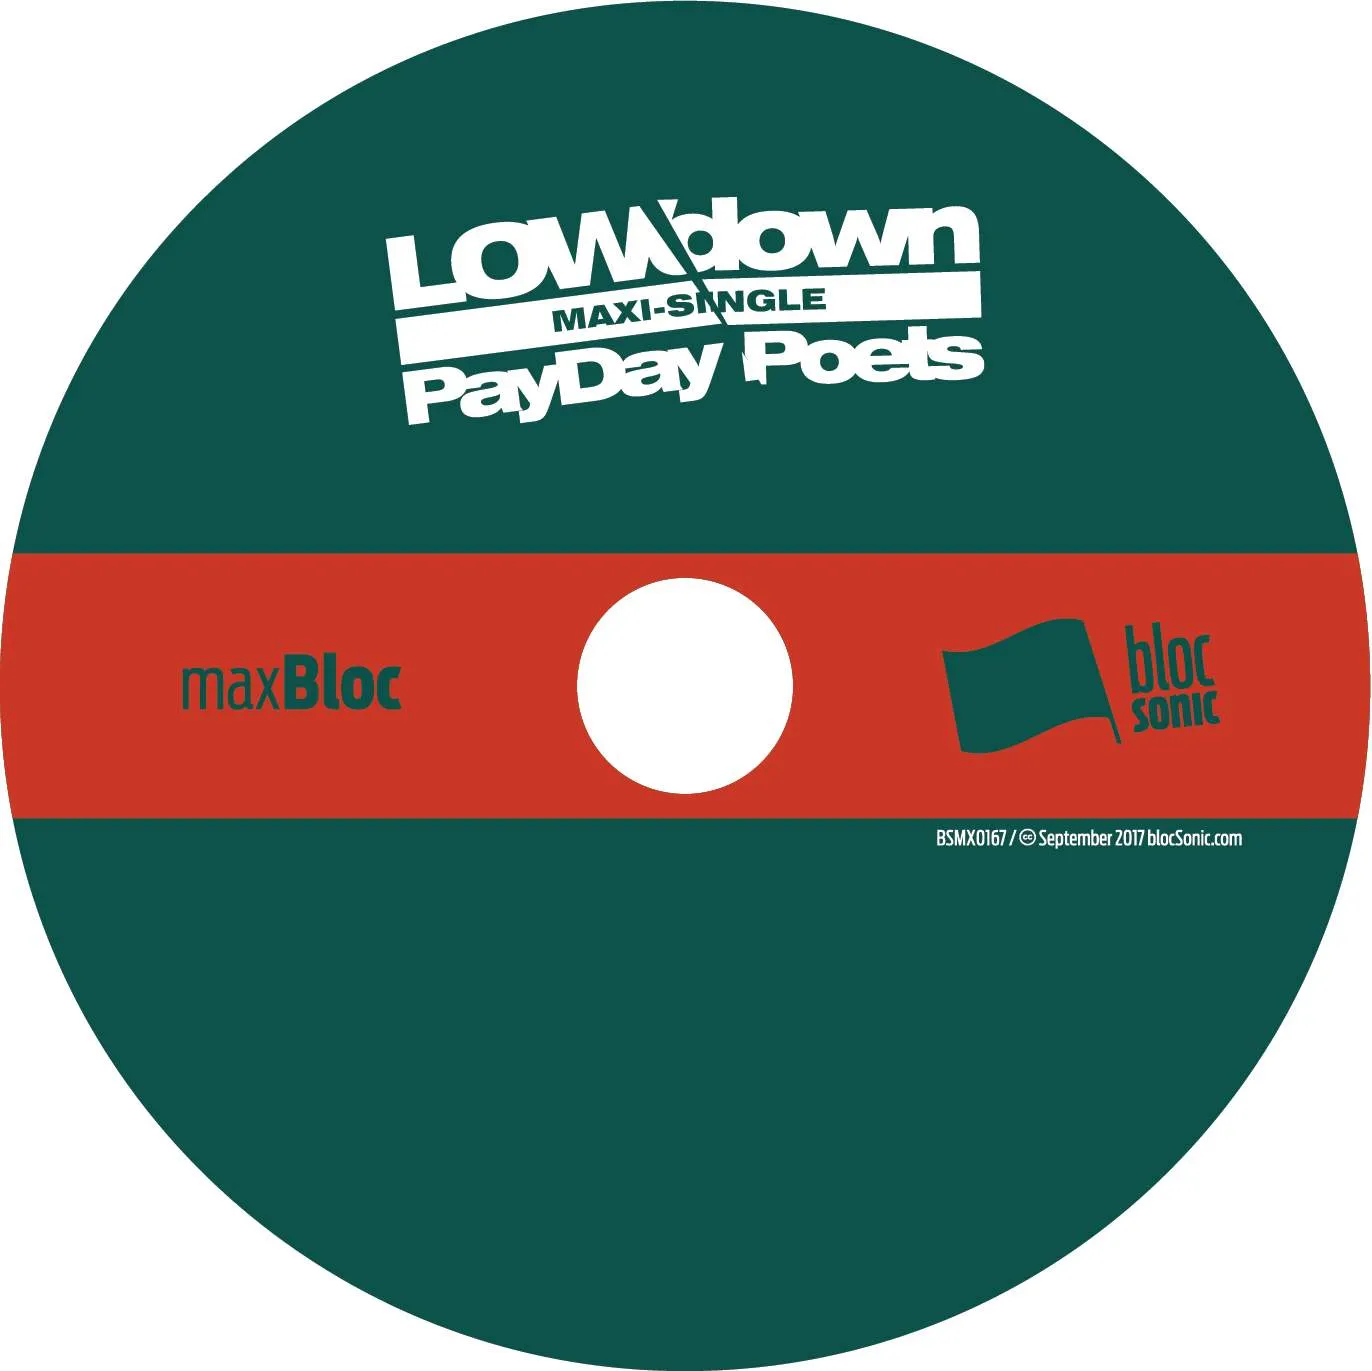 Album disc for “PayDay Poets” by LOWdown